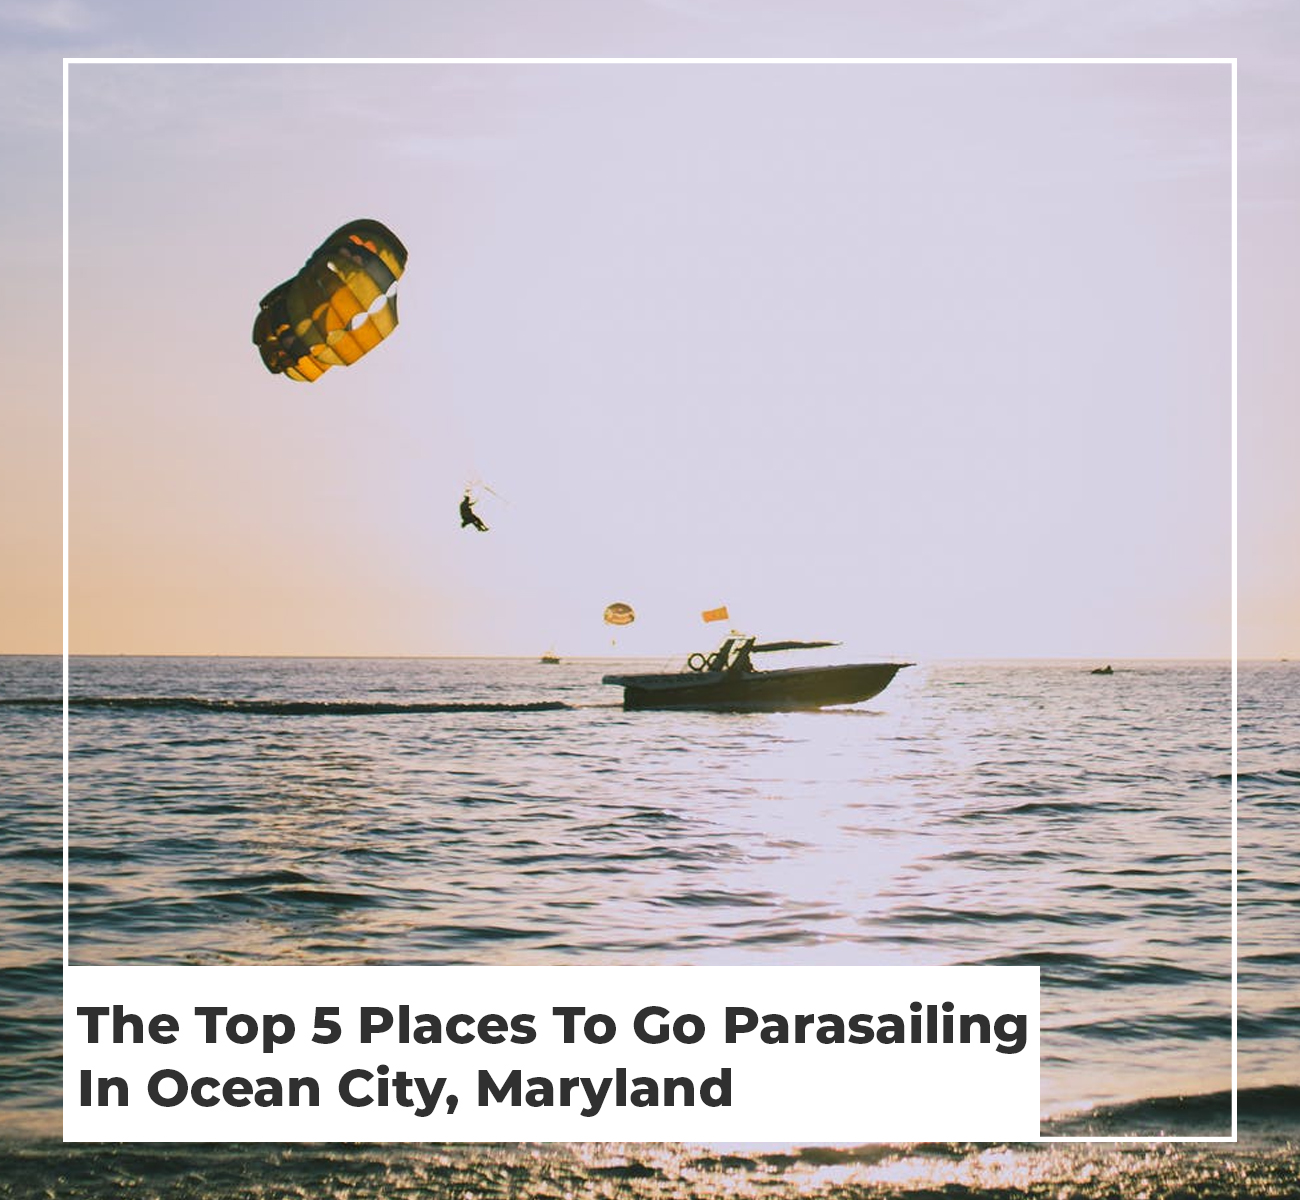 Parasailing in Maryland